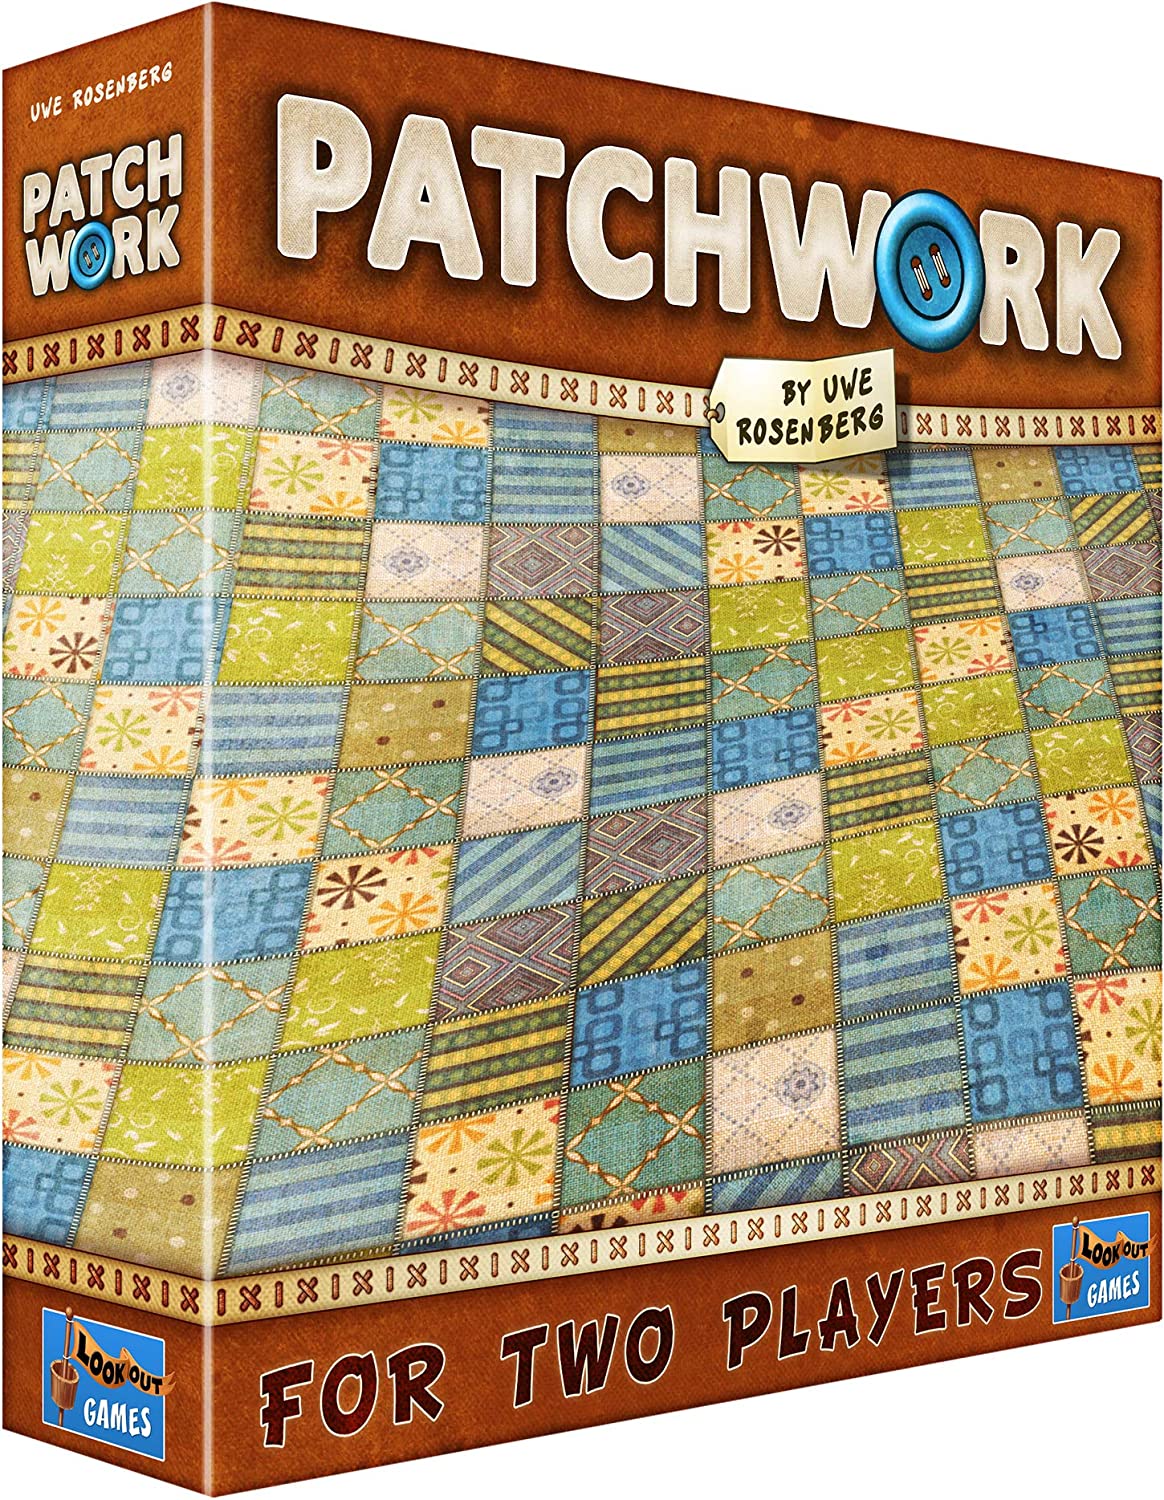 Patchwork Lookout Games